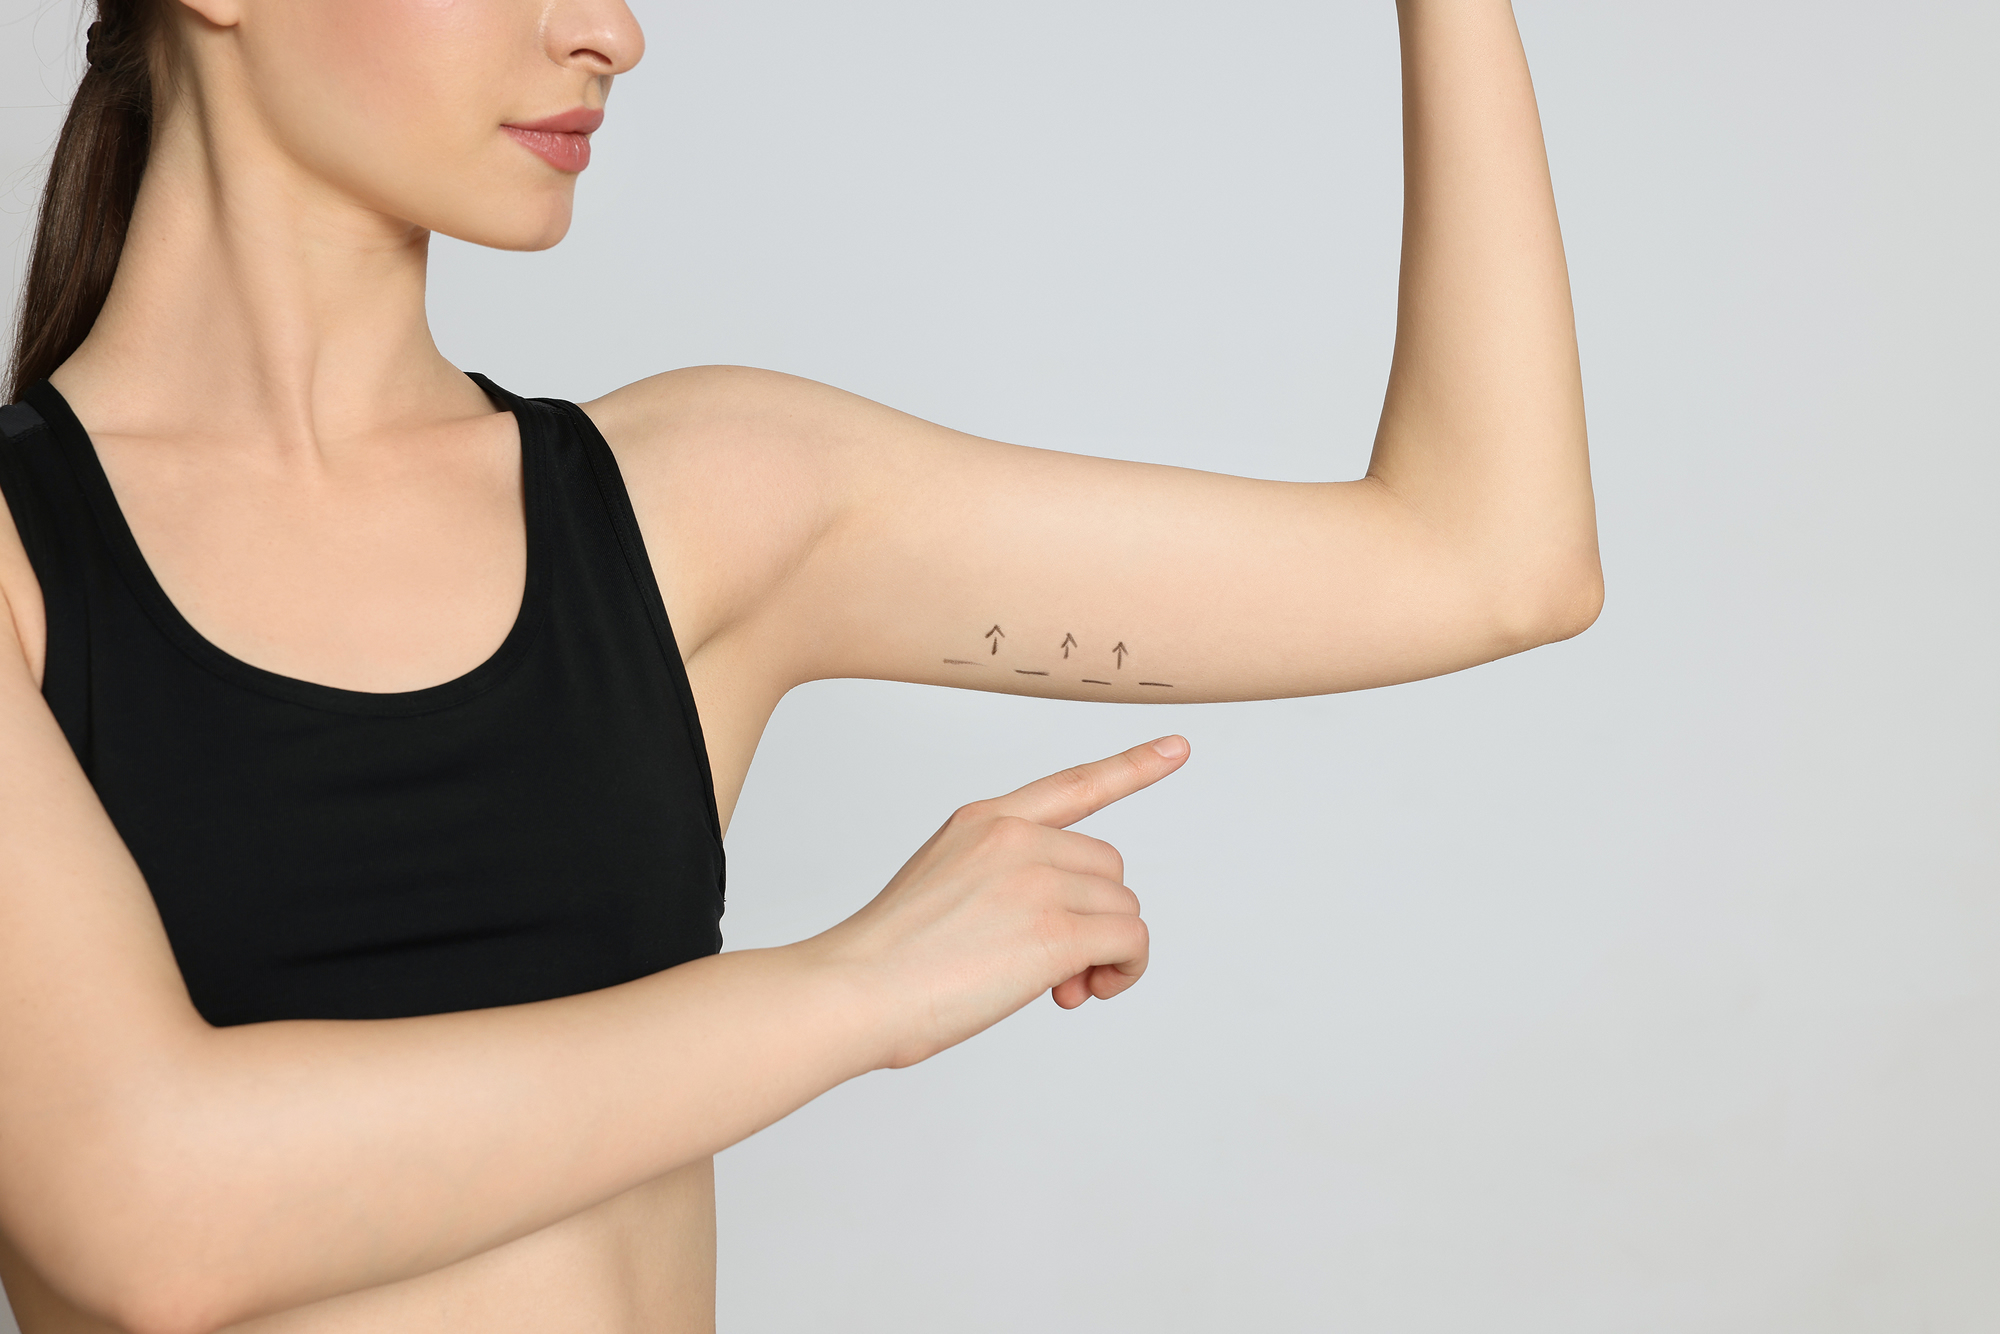 Woman with surgical marking before arm lift surgery for arm tightening.